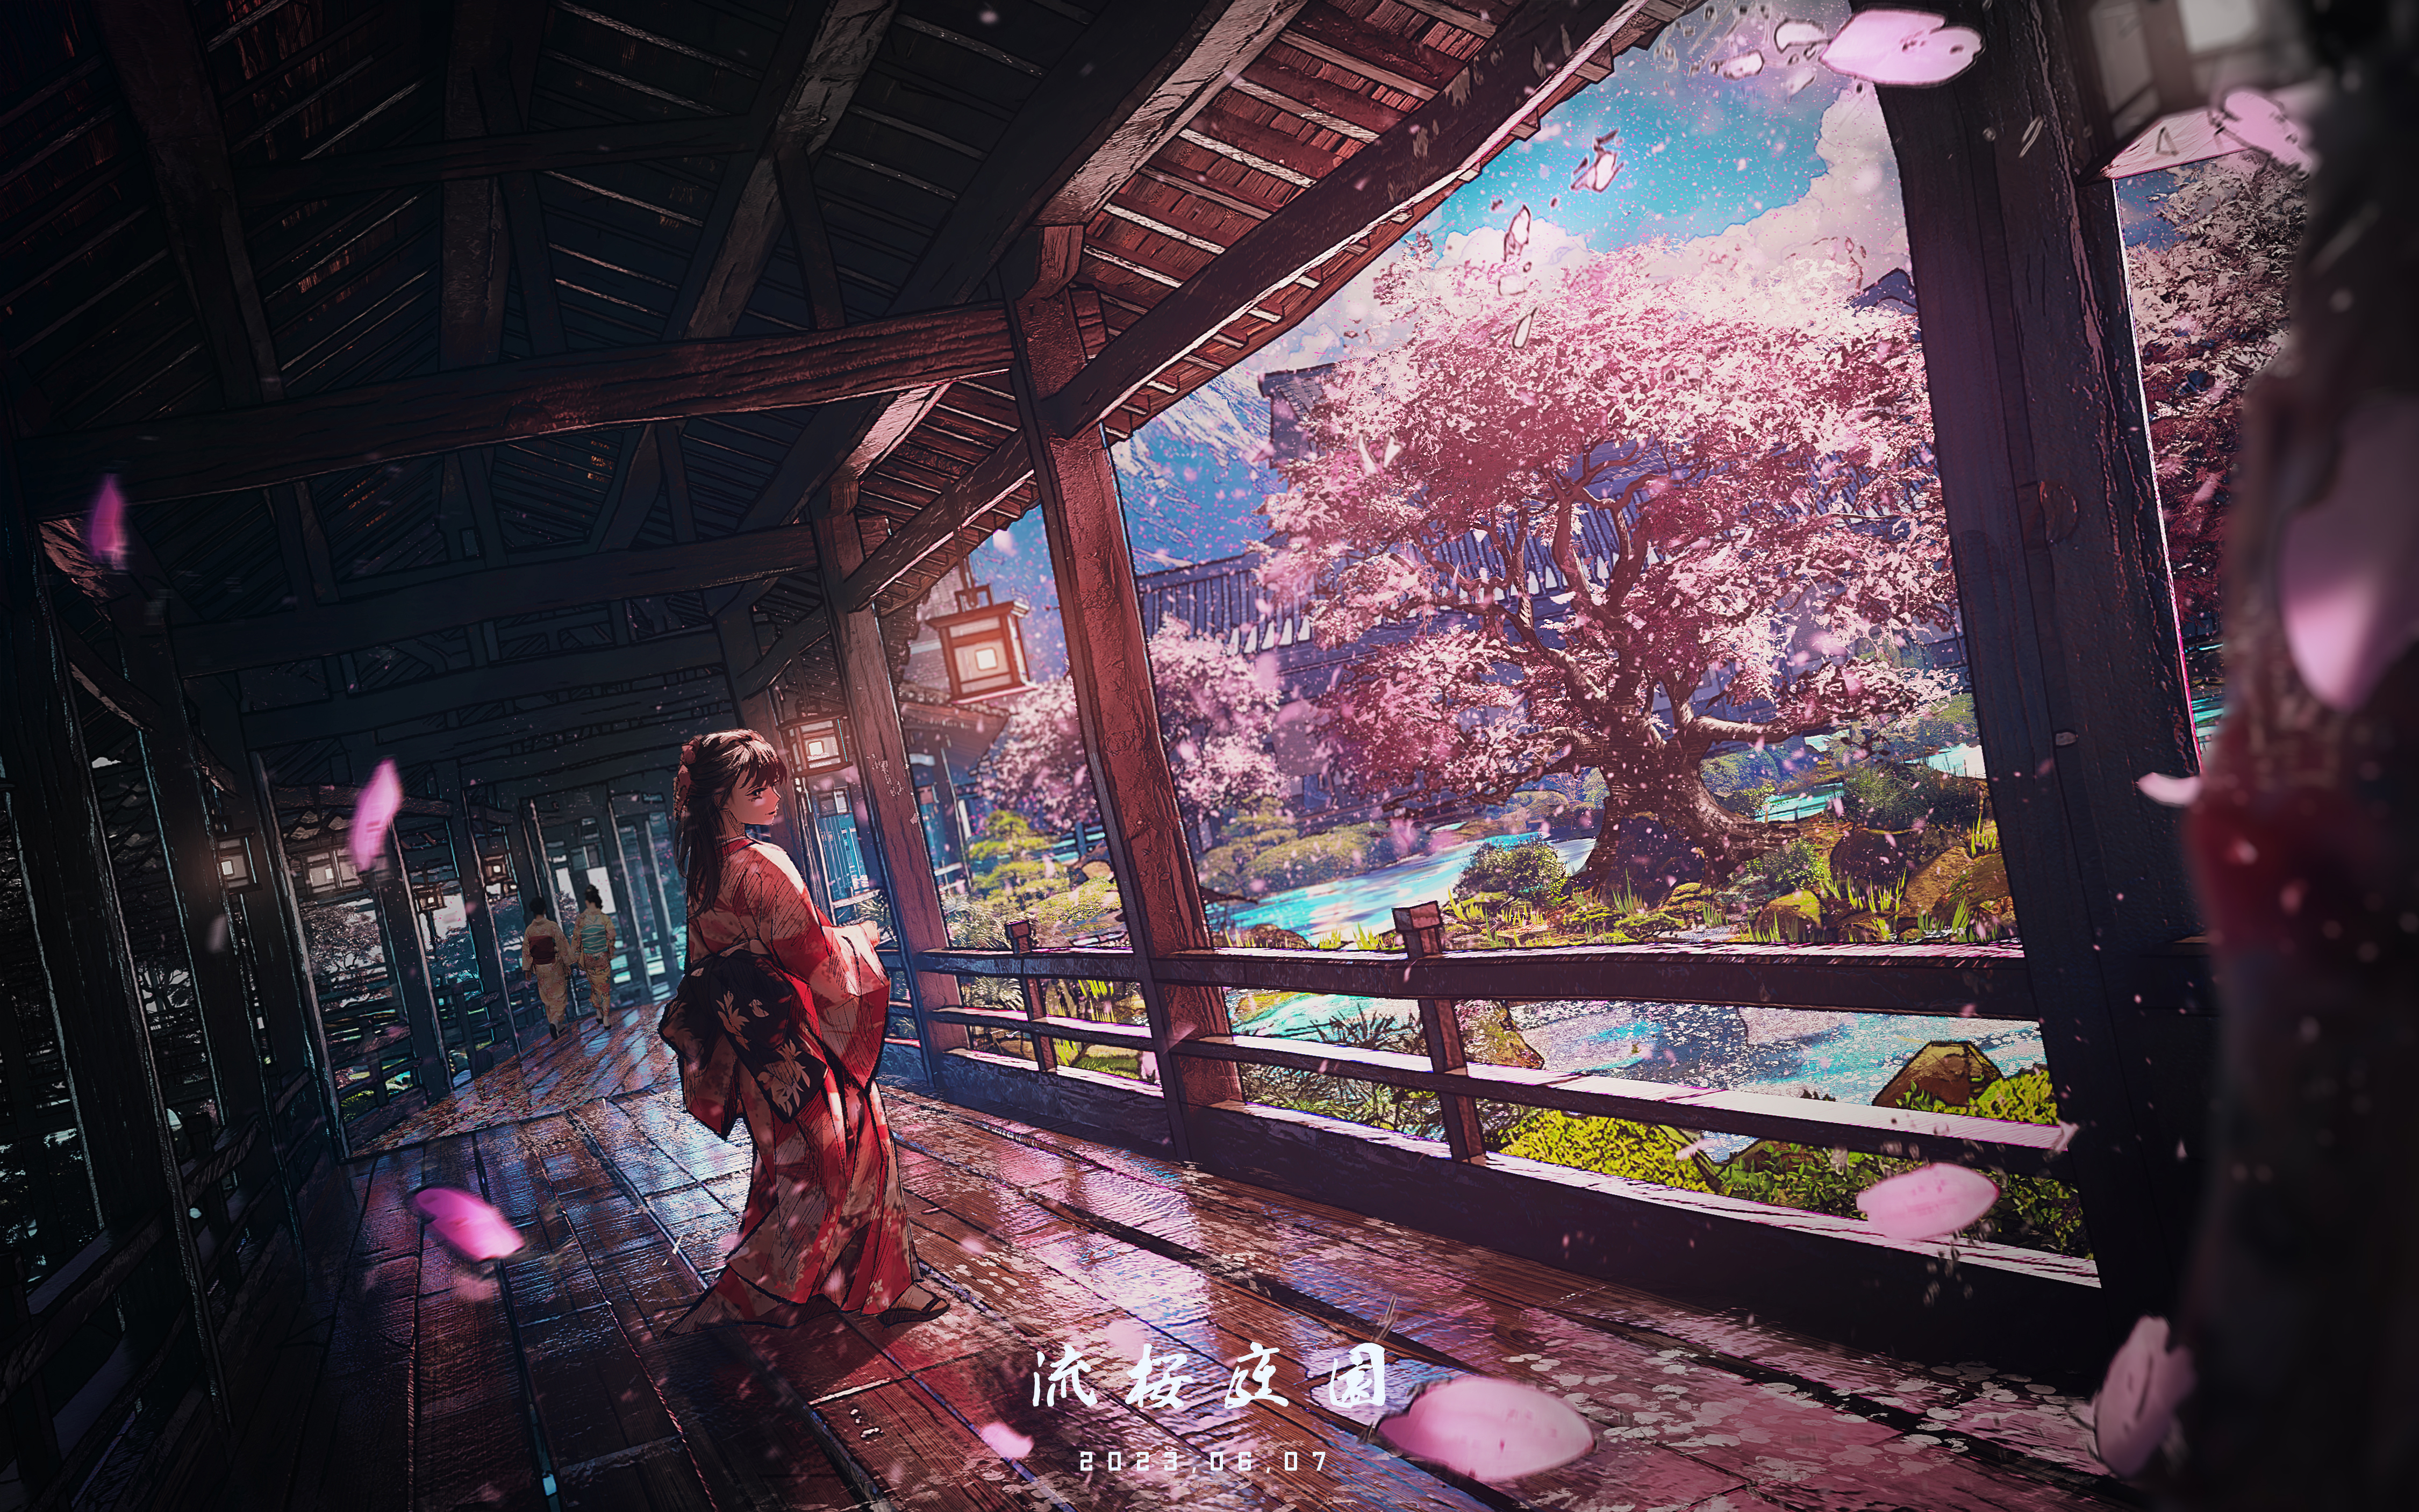 Anime Girls Architecture Japanese Clothes Trees Wooden Floor Kimono Cherry Blossom Petals Depth Of F 4500x2813